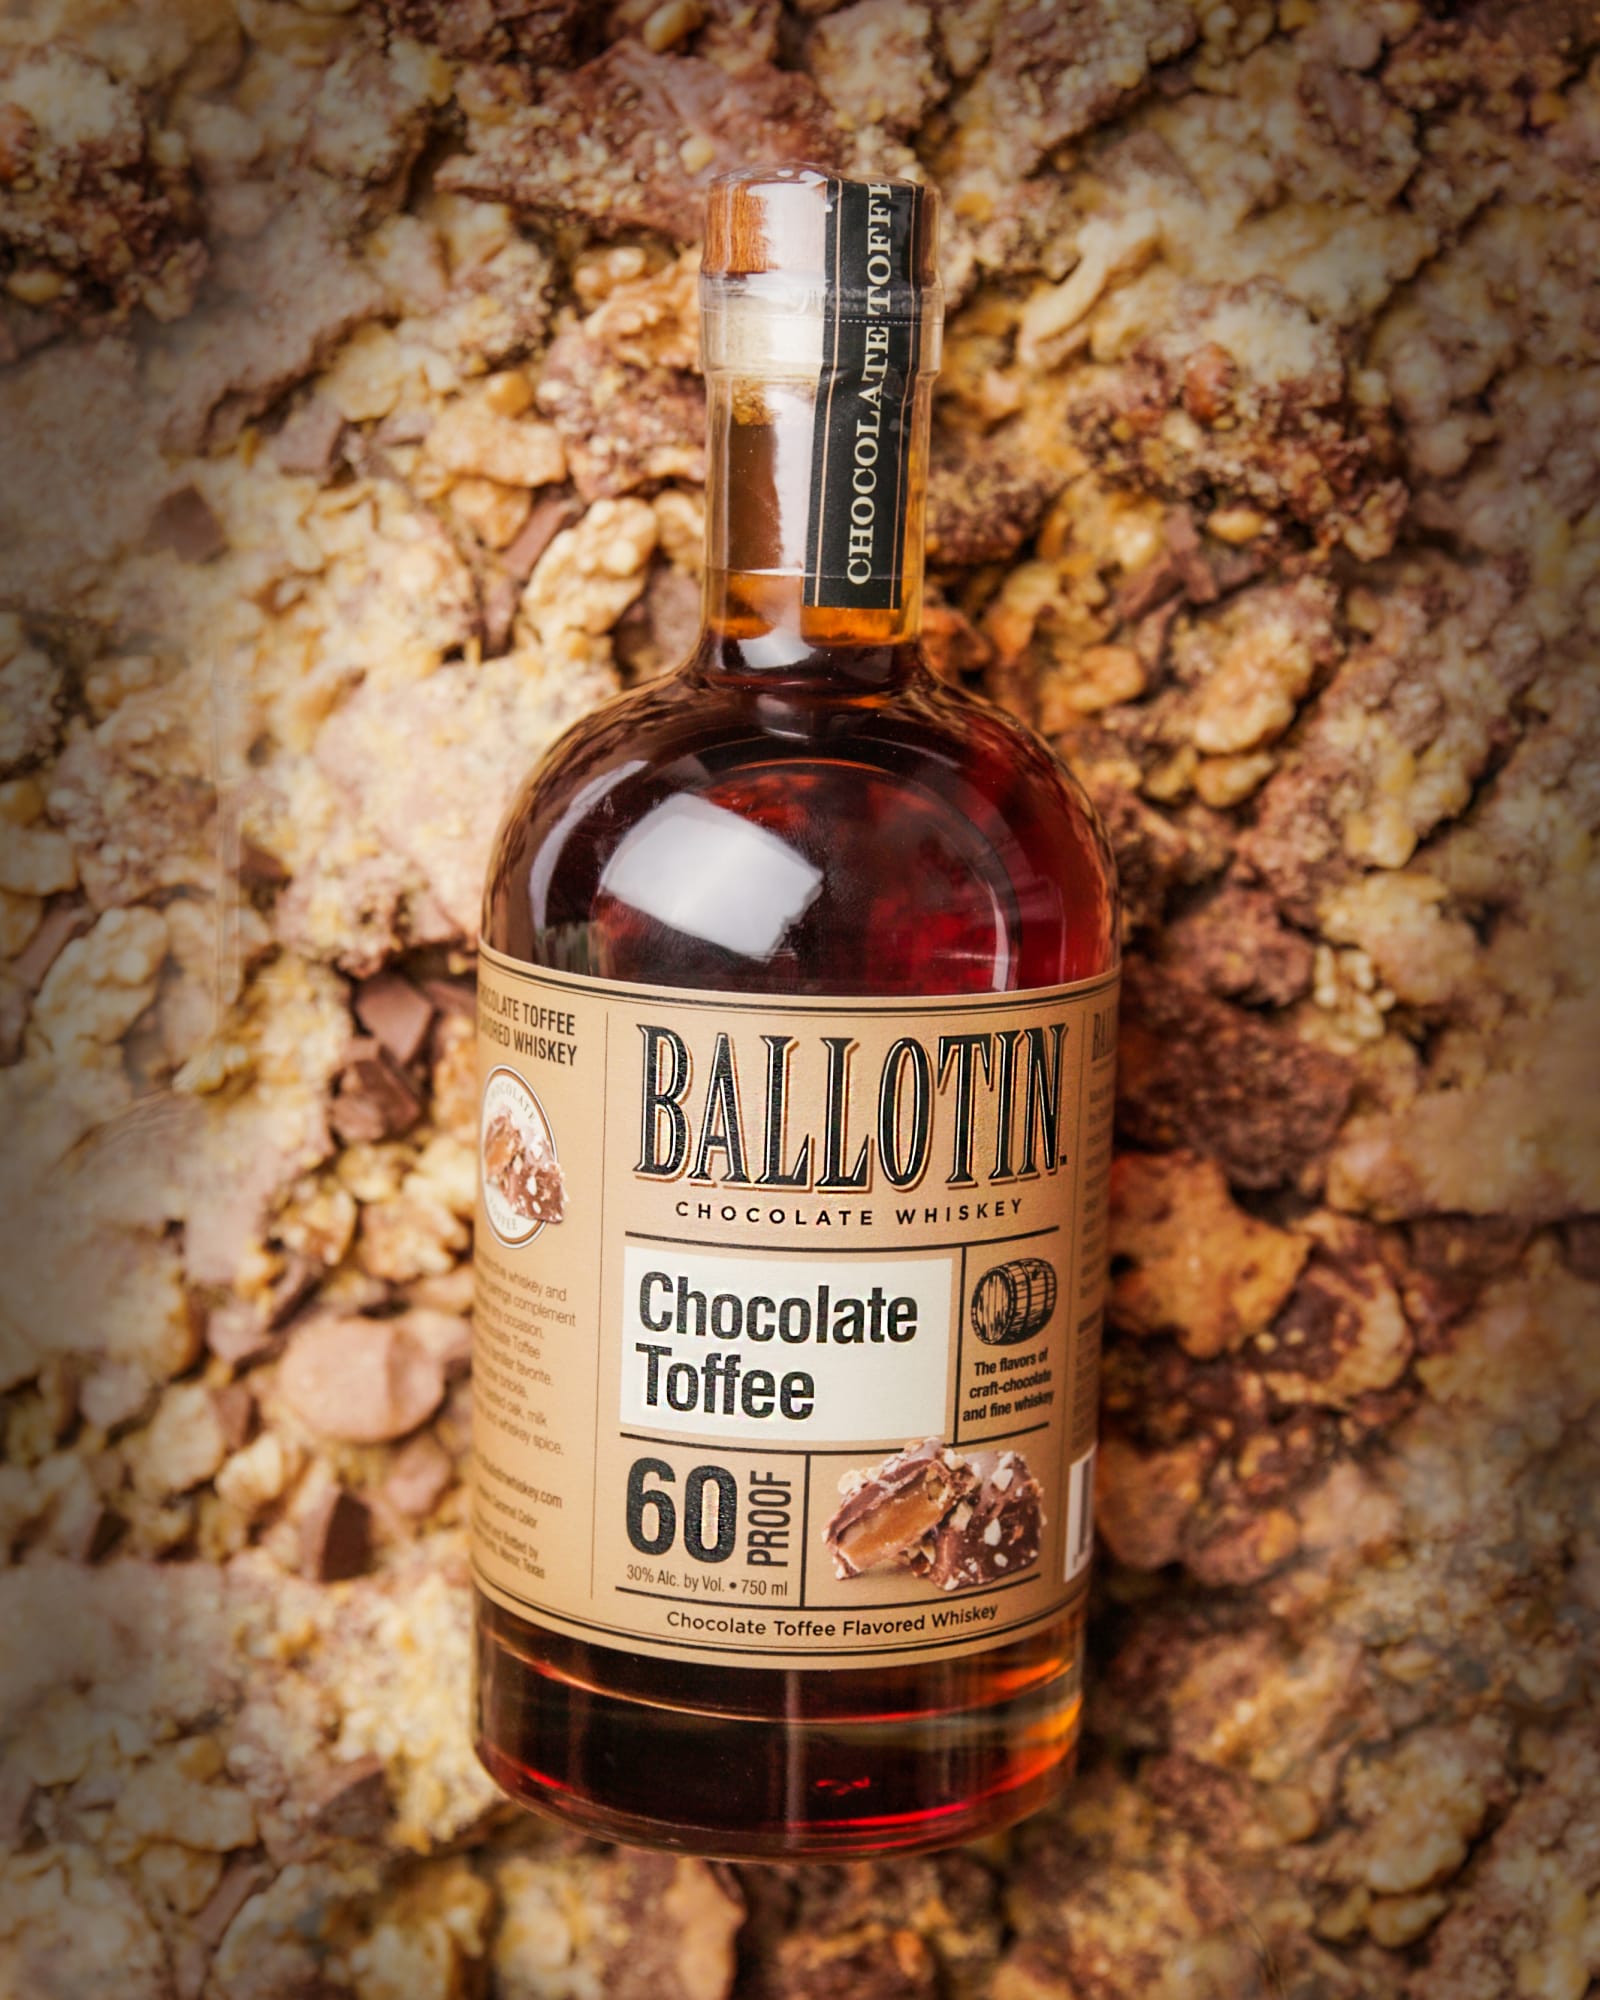 Ballotin Chocolate Toffee Whiskey toasts to a sweet, indulgent sip